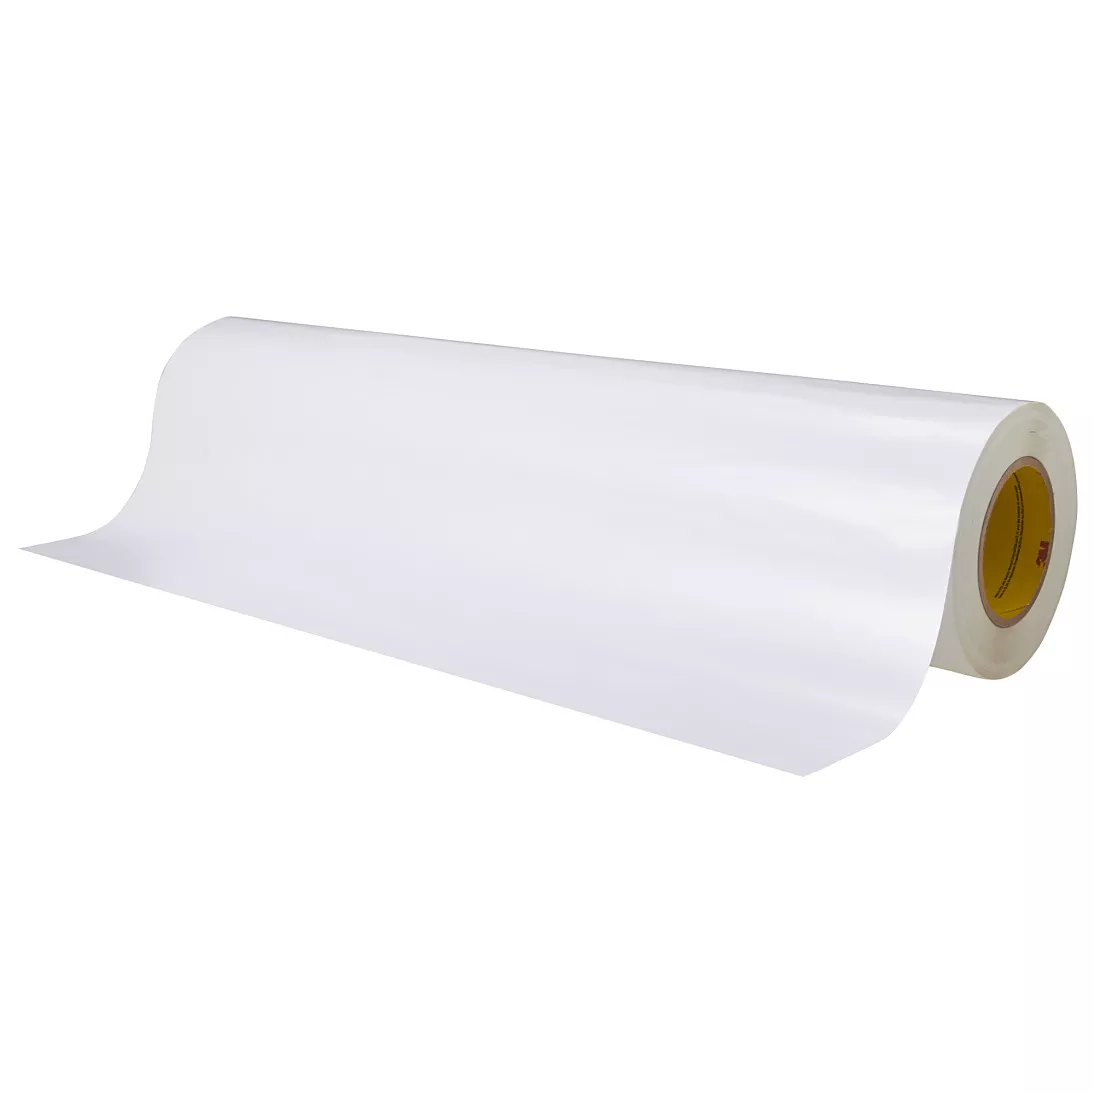 3M™ Double Coated Tape 96042, Clear, 12 in x 60 yd, 5 mil, 4 rolls per
case